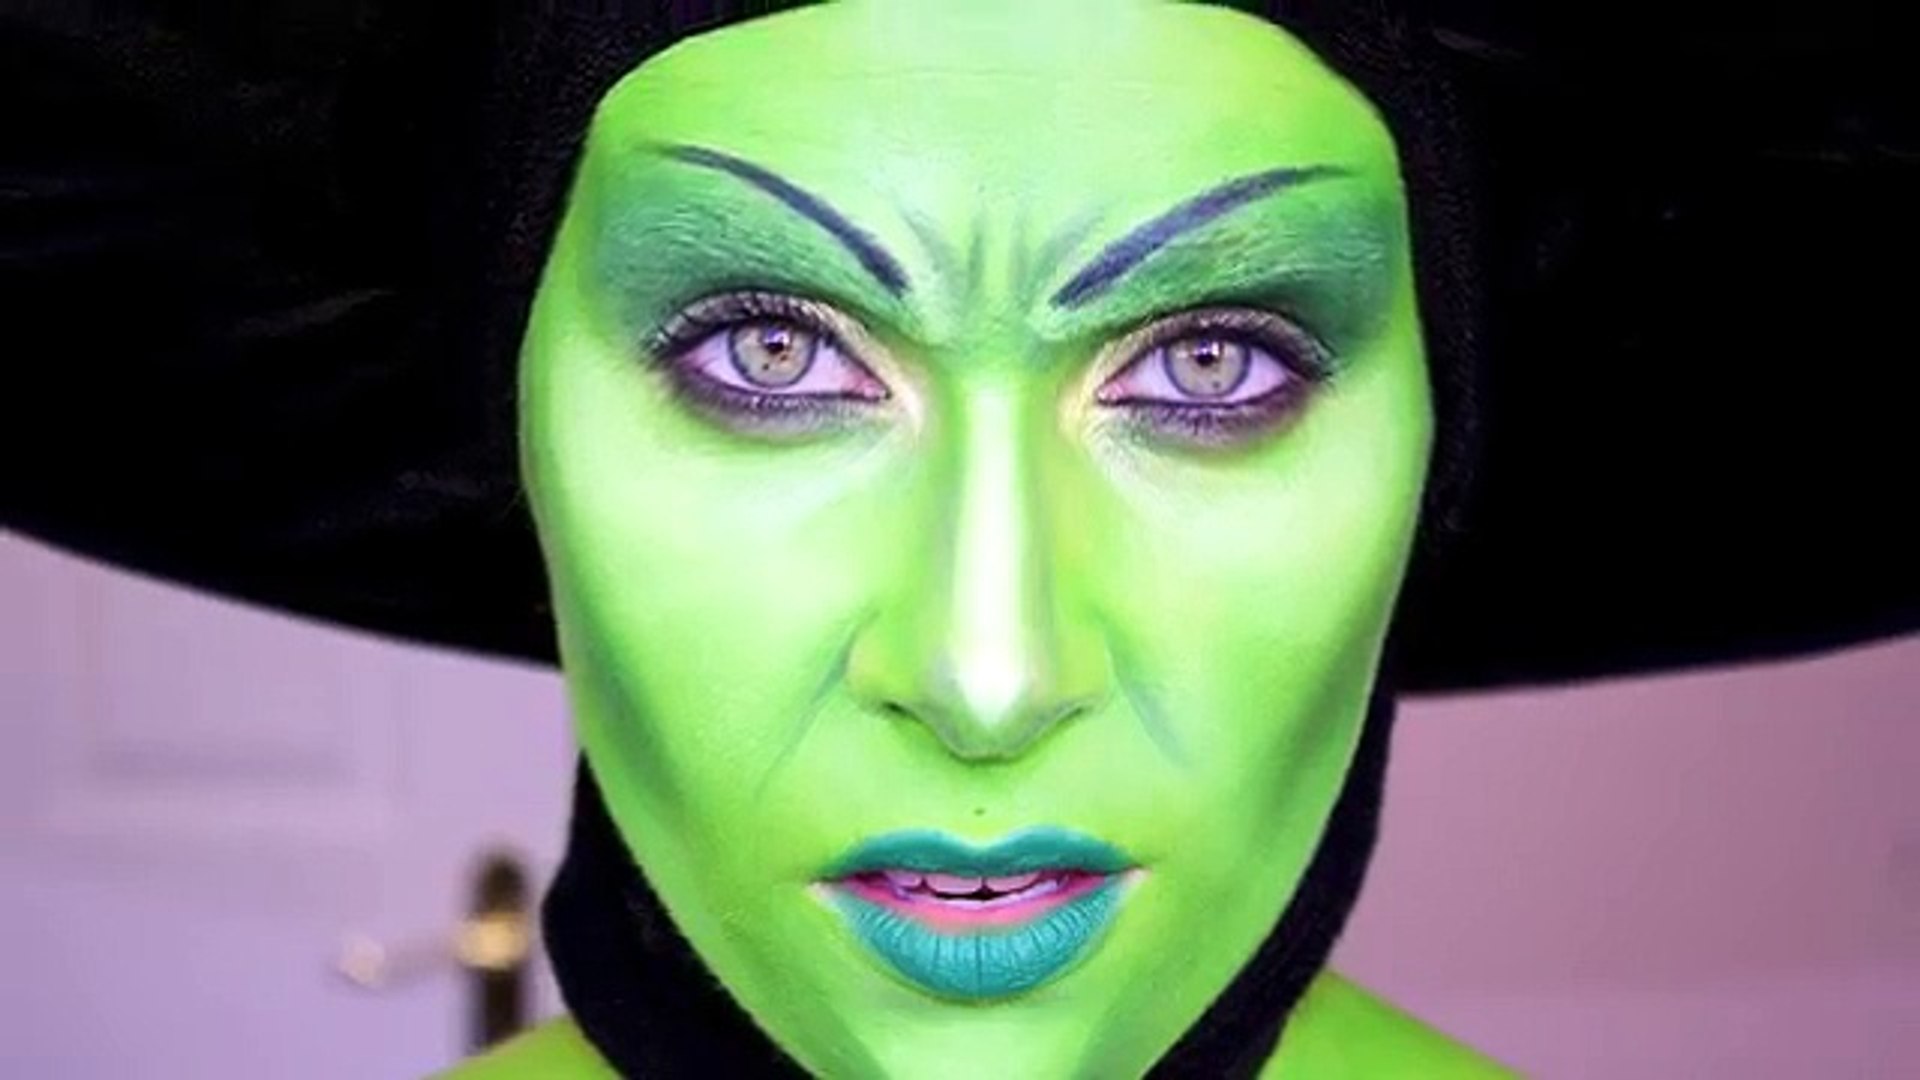 Wicked Witch of the West; Halloween makeup tutorial. - Dailymotion Video